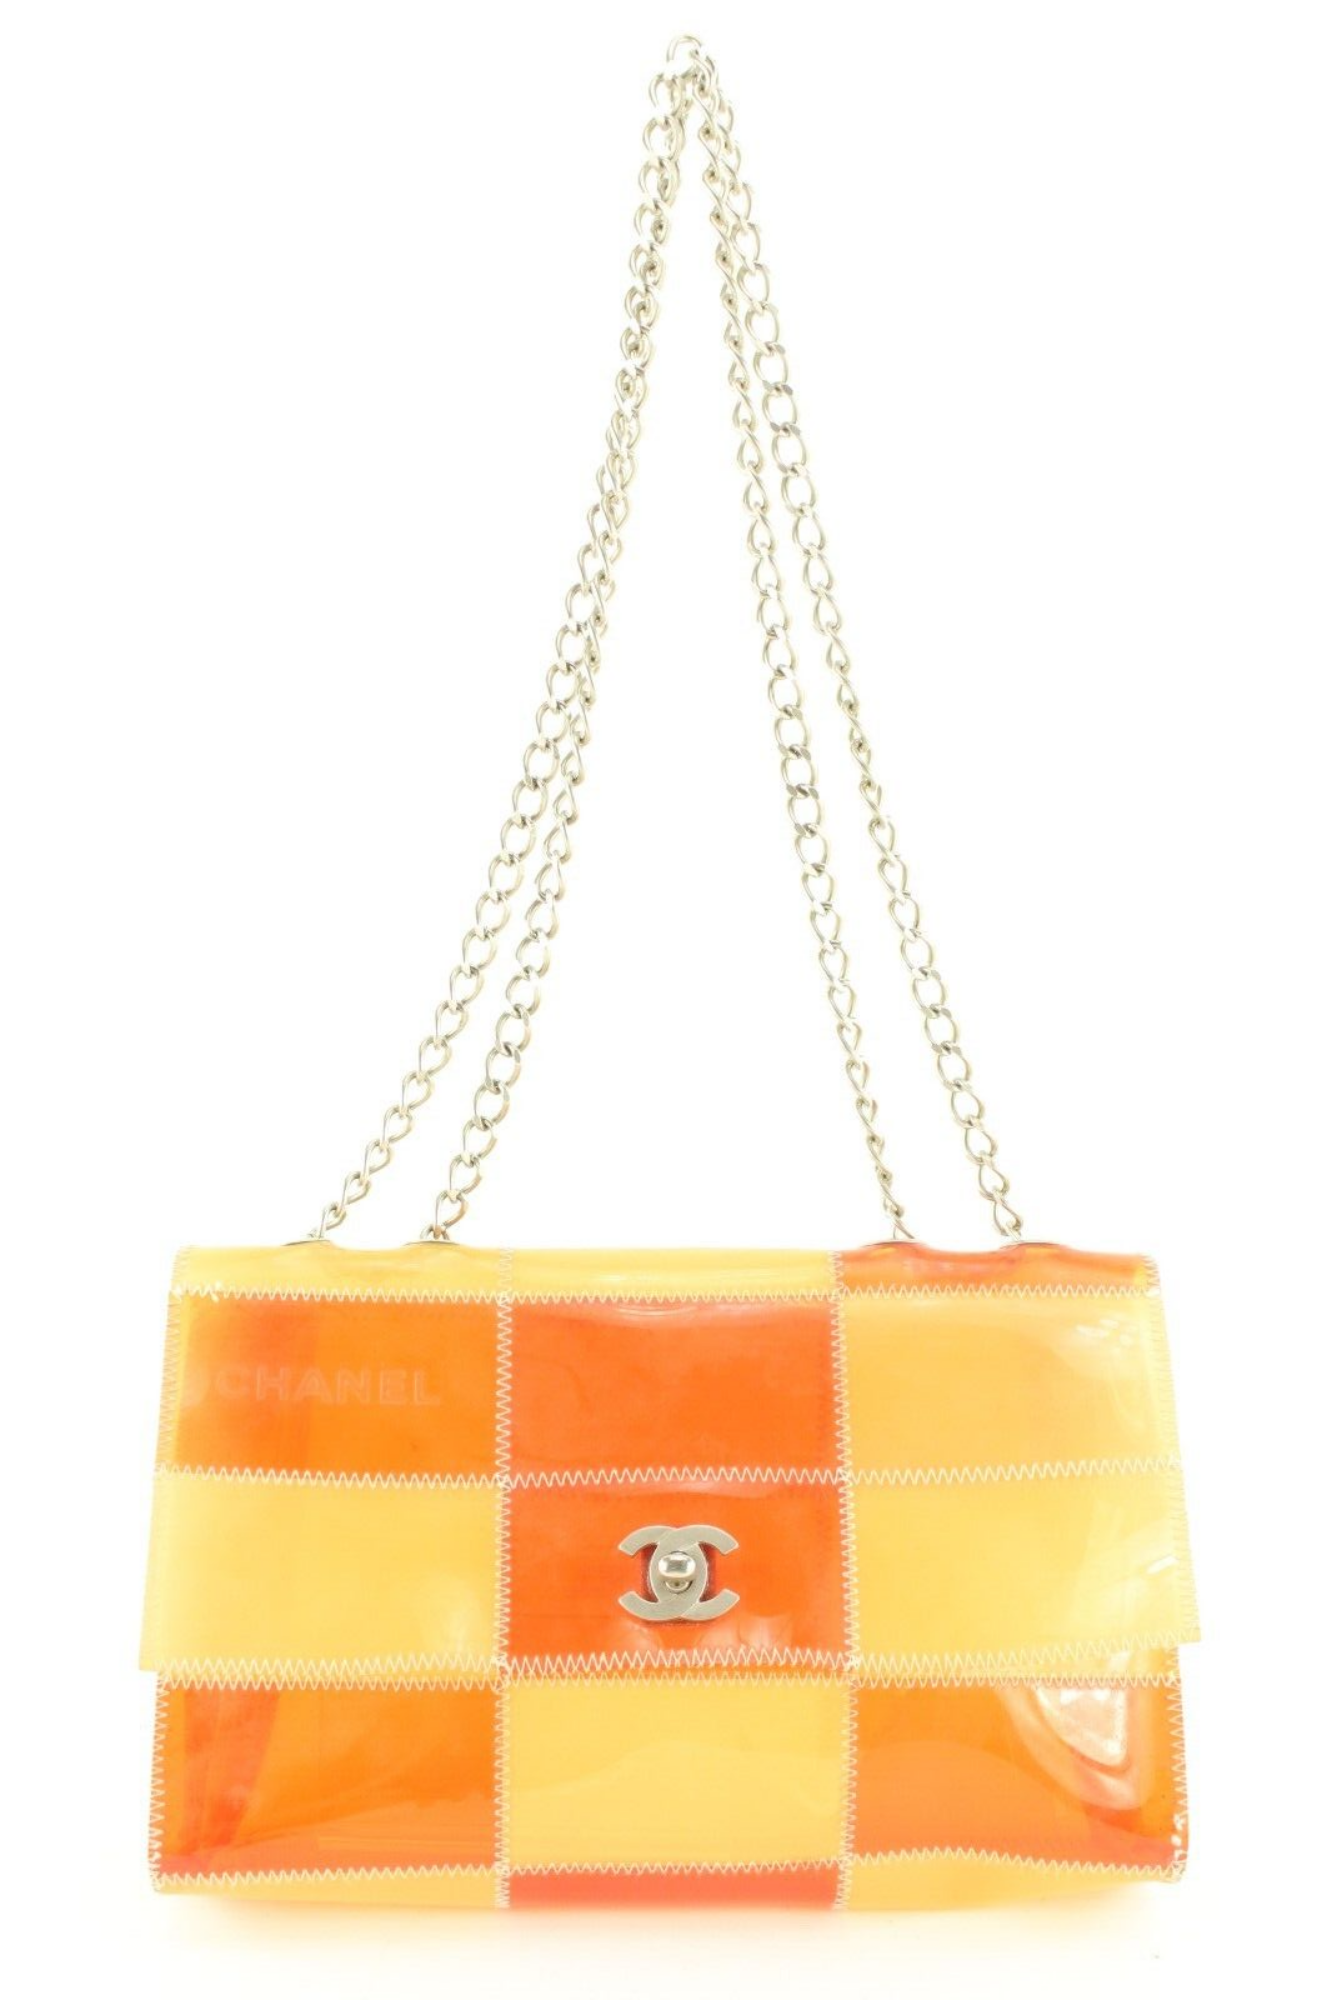 Chanel Clear Patchwork Classic Flap SHW Chain Bag